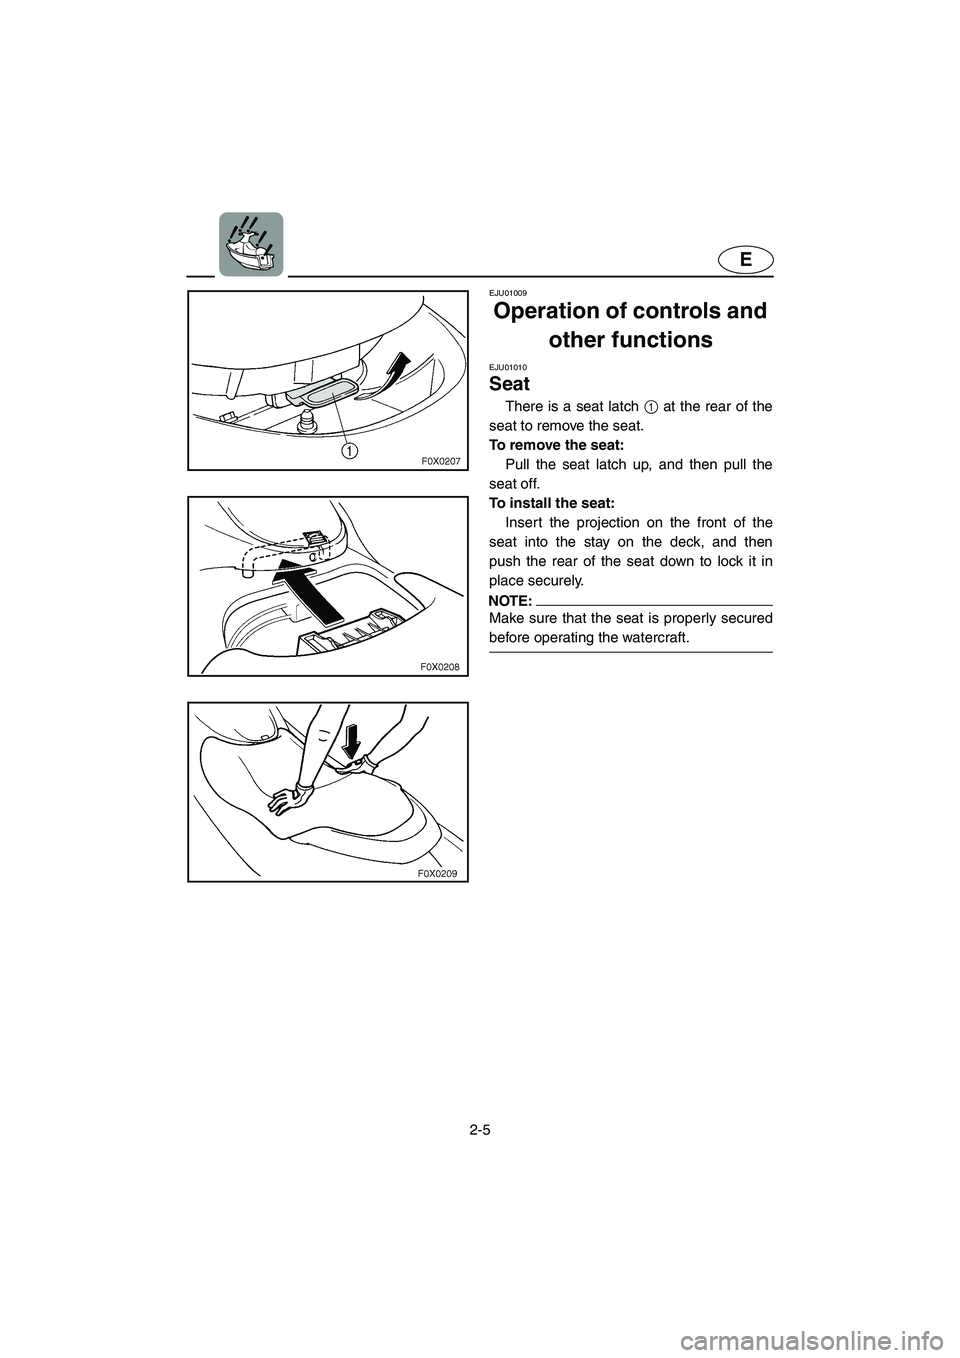 YAMAHA GP800R 2002  Owners Manual 2-5
E
EJU01009 
Operation of controls and 
other functions 
EJU01010 
Seat  
There is a seat latch 1 at the rear of the
seat to remove the seat. 
To remove the seat: 
Pull the seat latch up, and then 